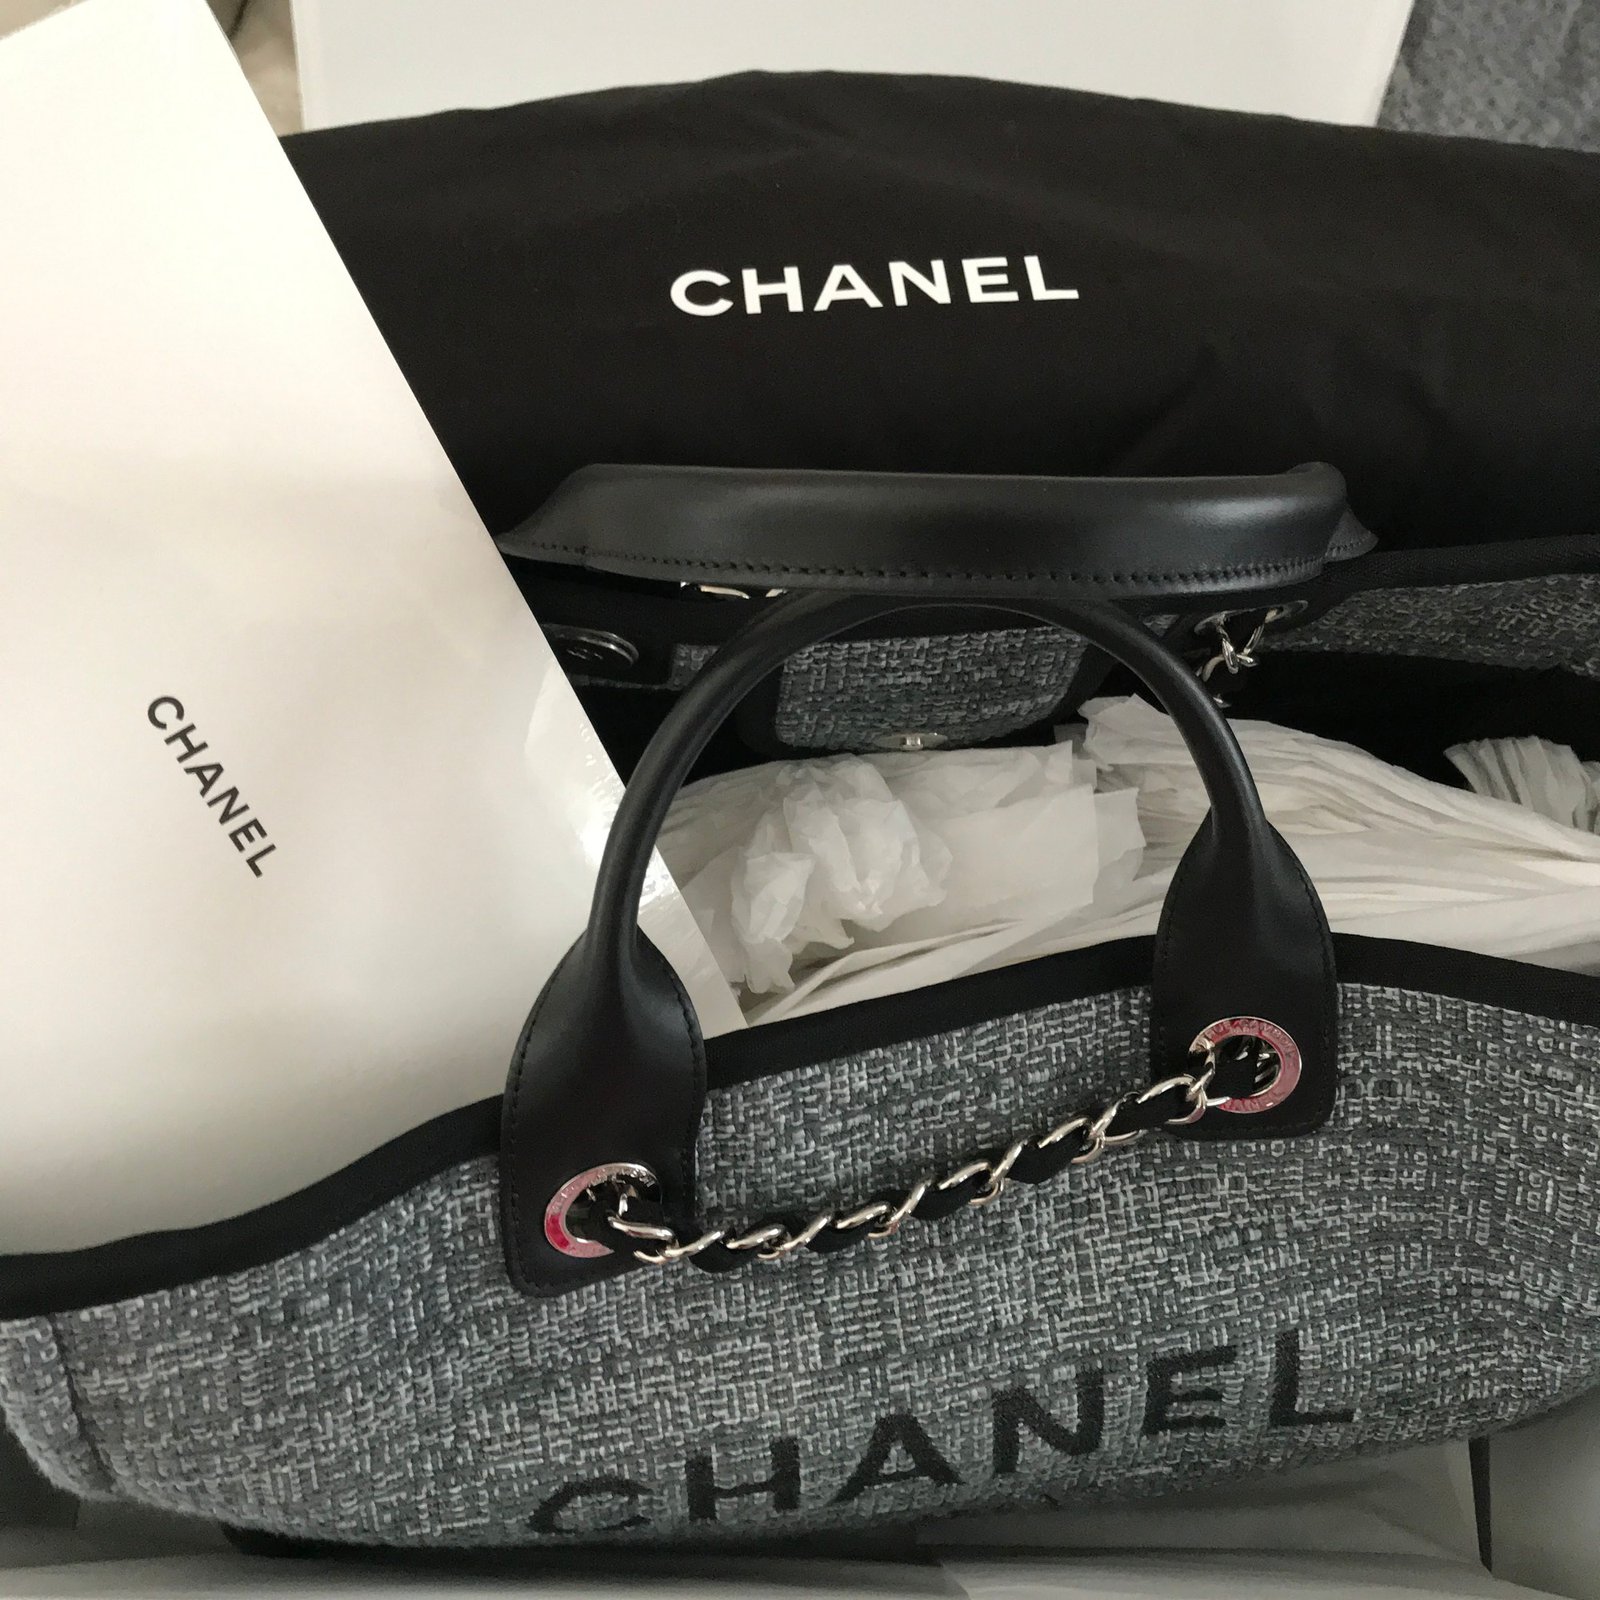 Chanel Deauville Large Tote Bag NEW 2018 - Grey with Glitter!